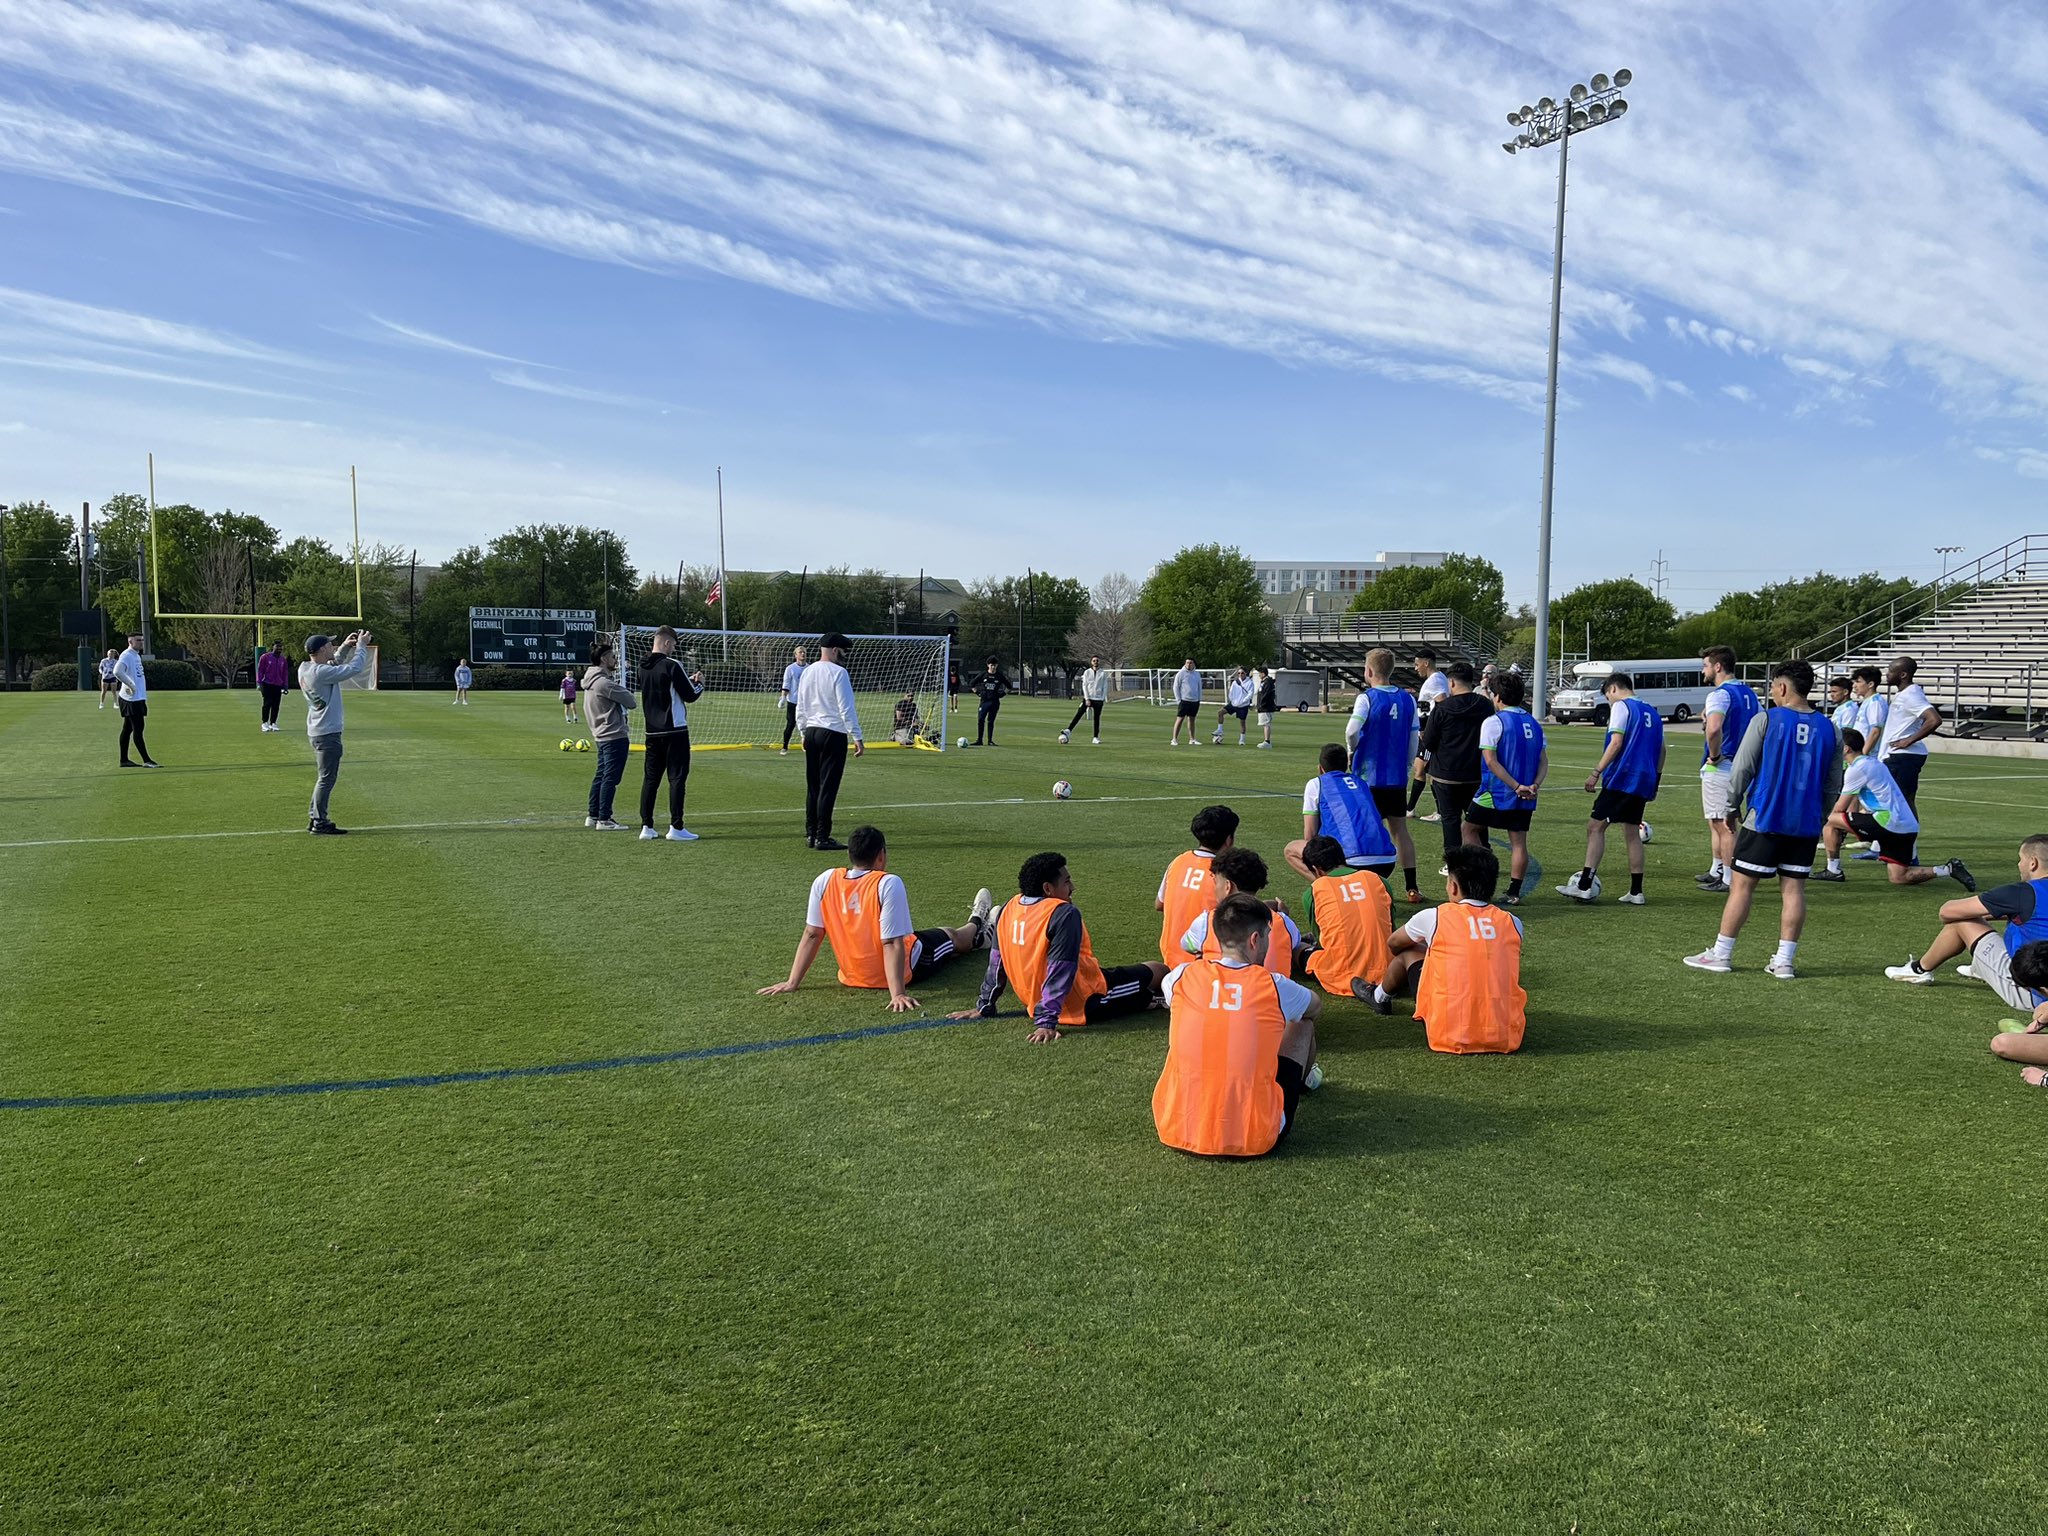 Dallas Soccer Alliance chases million-dollar TST prize with Dallas United  team - 3rd Degree